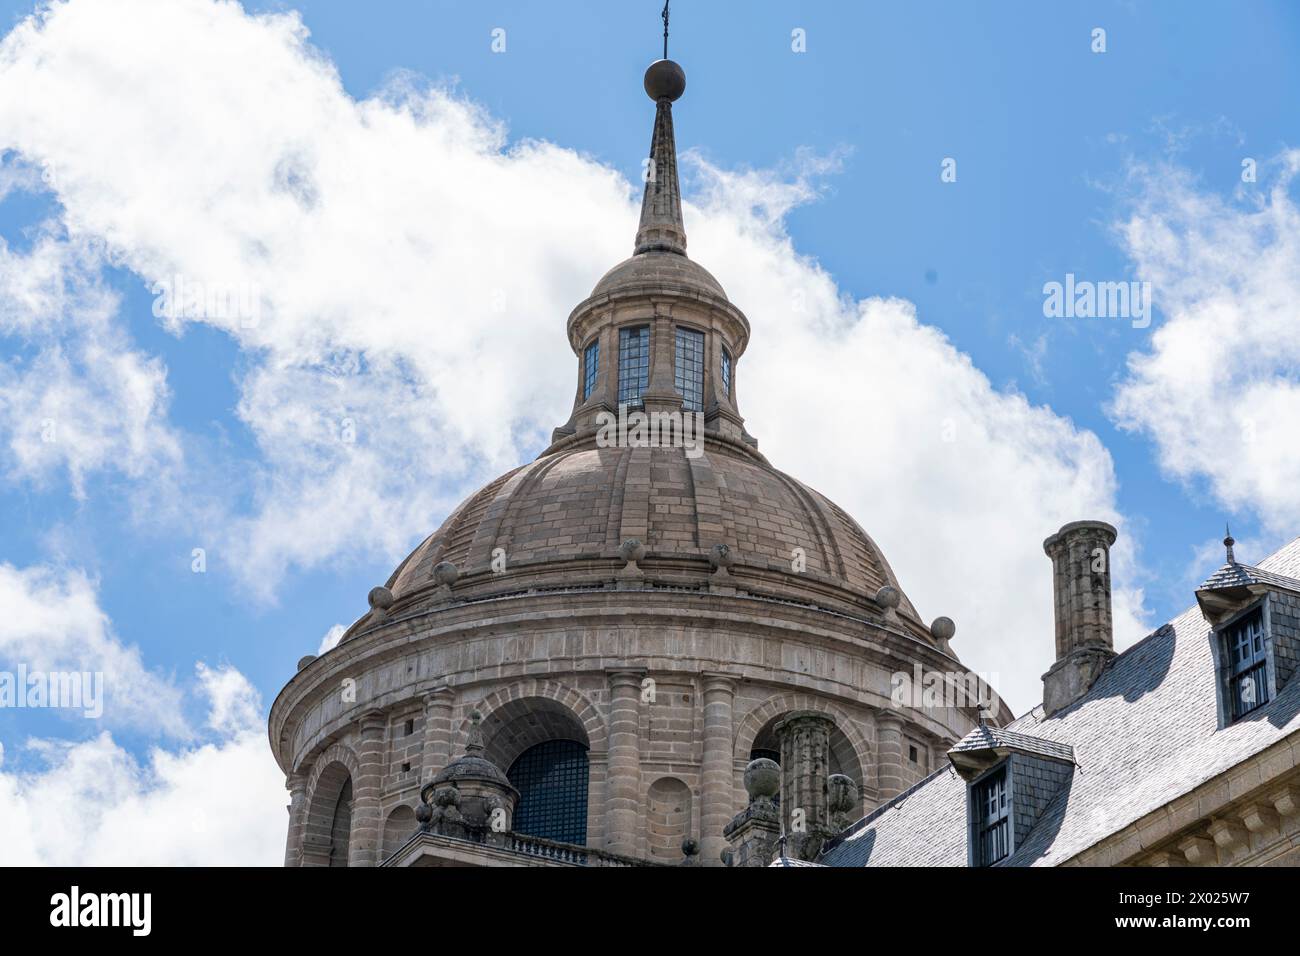 Sculptural details and the iconic dome of El Escorial Monastery stand out against a blue sky with fluffy clouds Stock Photo